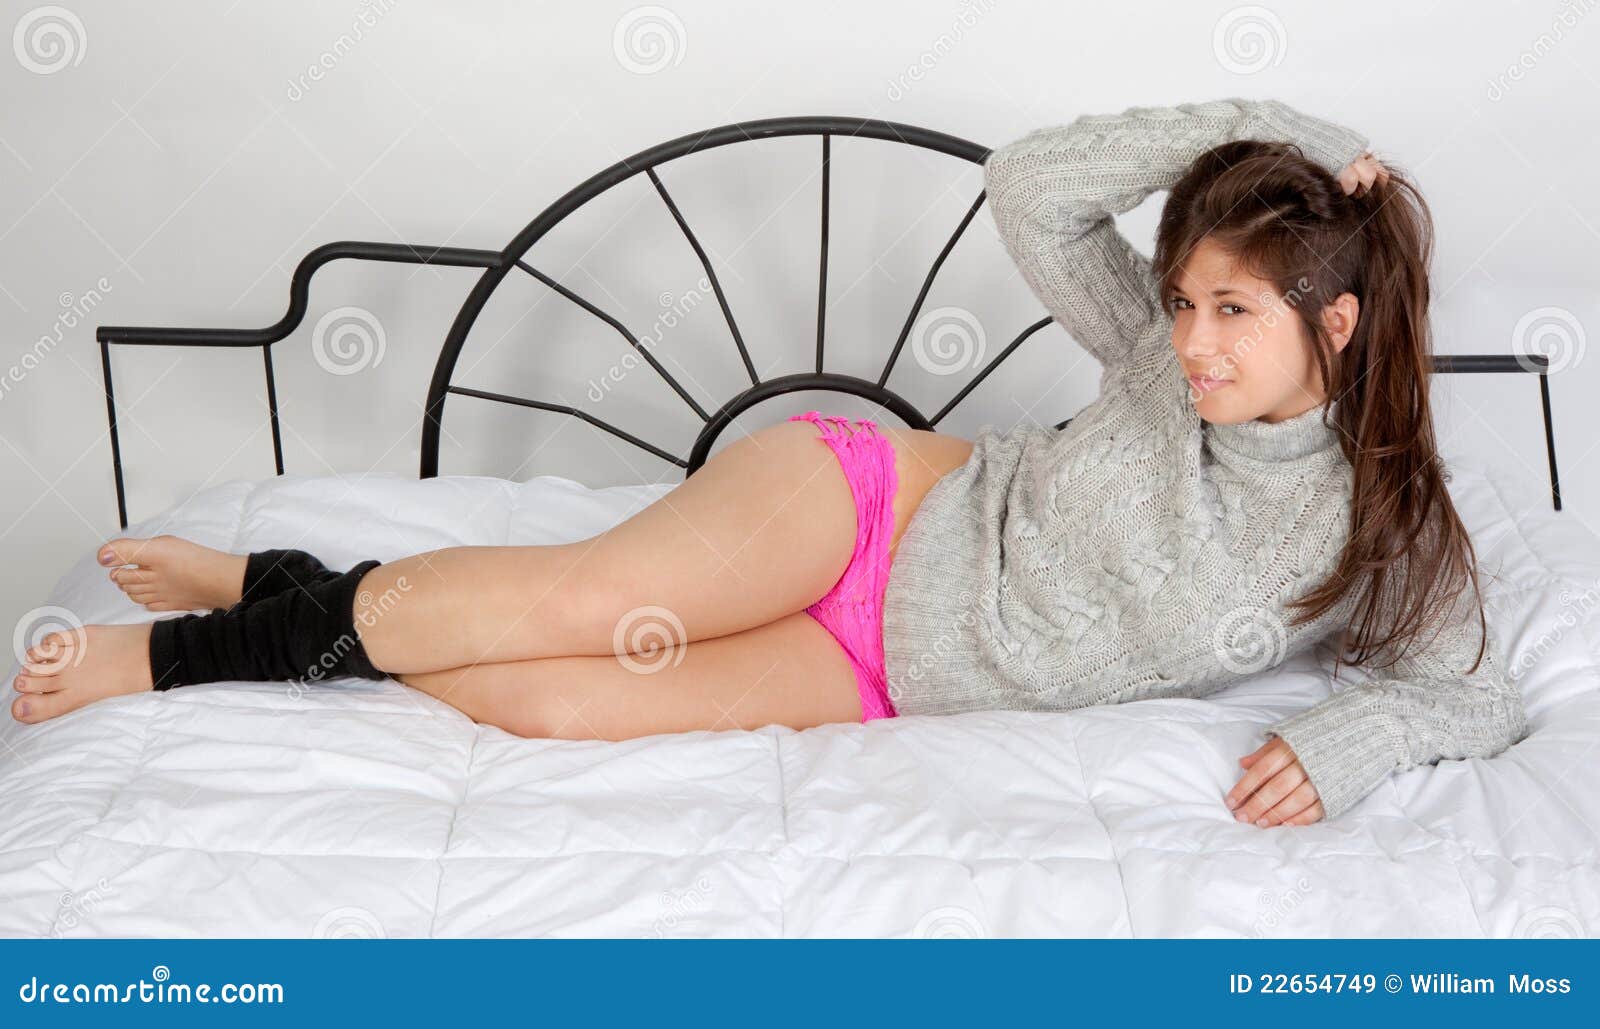 Cute Woman in Leg Warmers and Pink Panties on Bed Stock Image